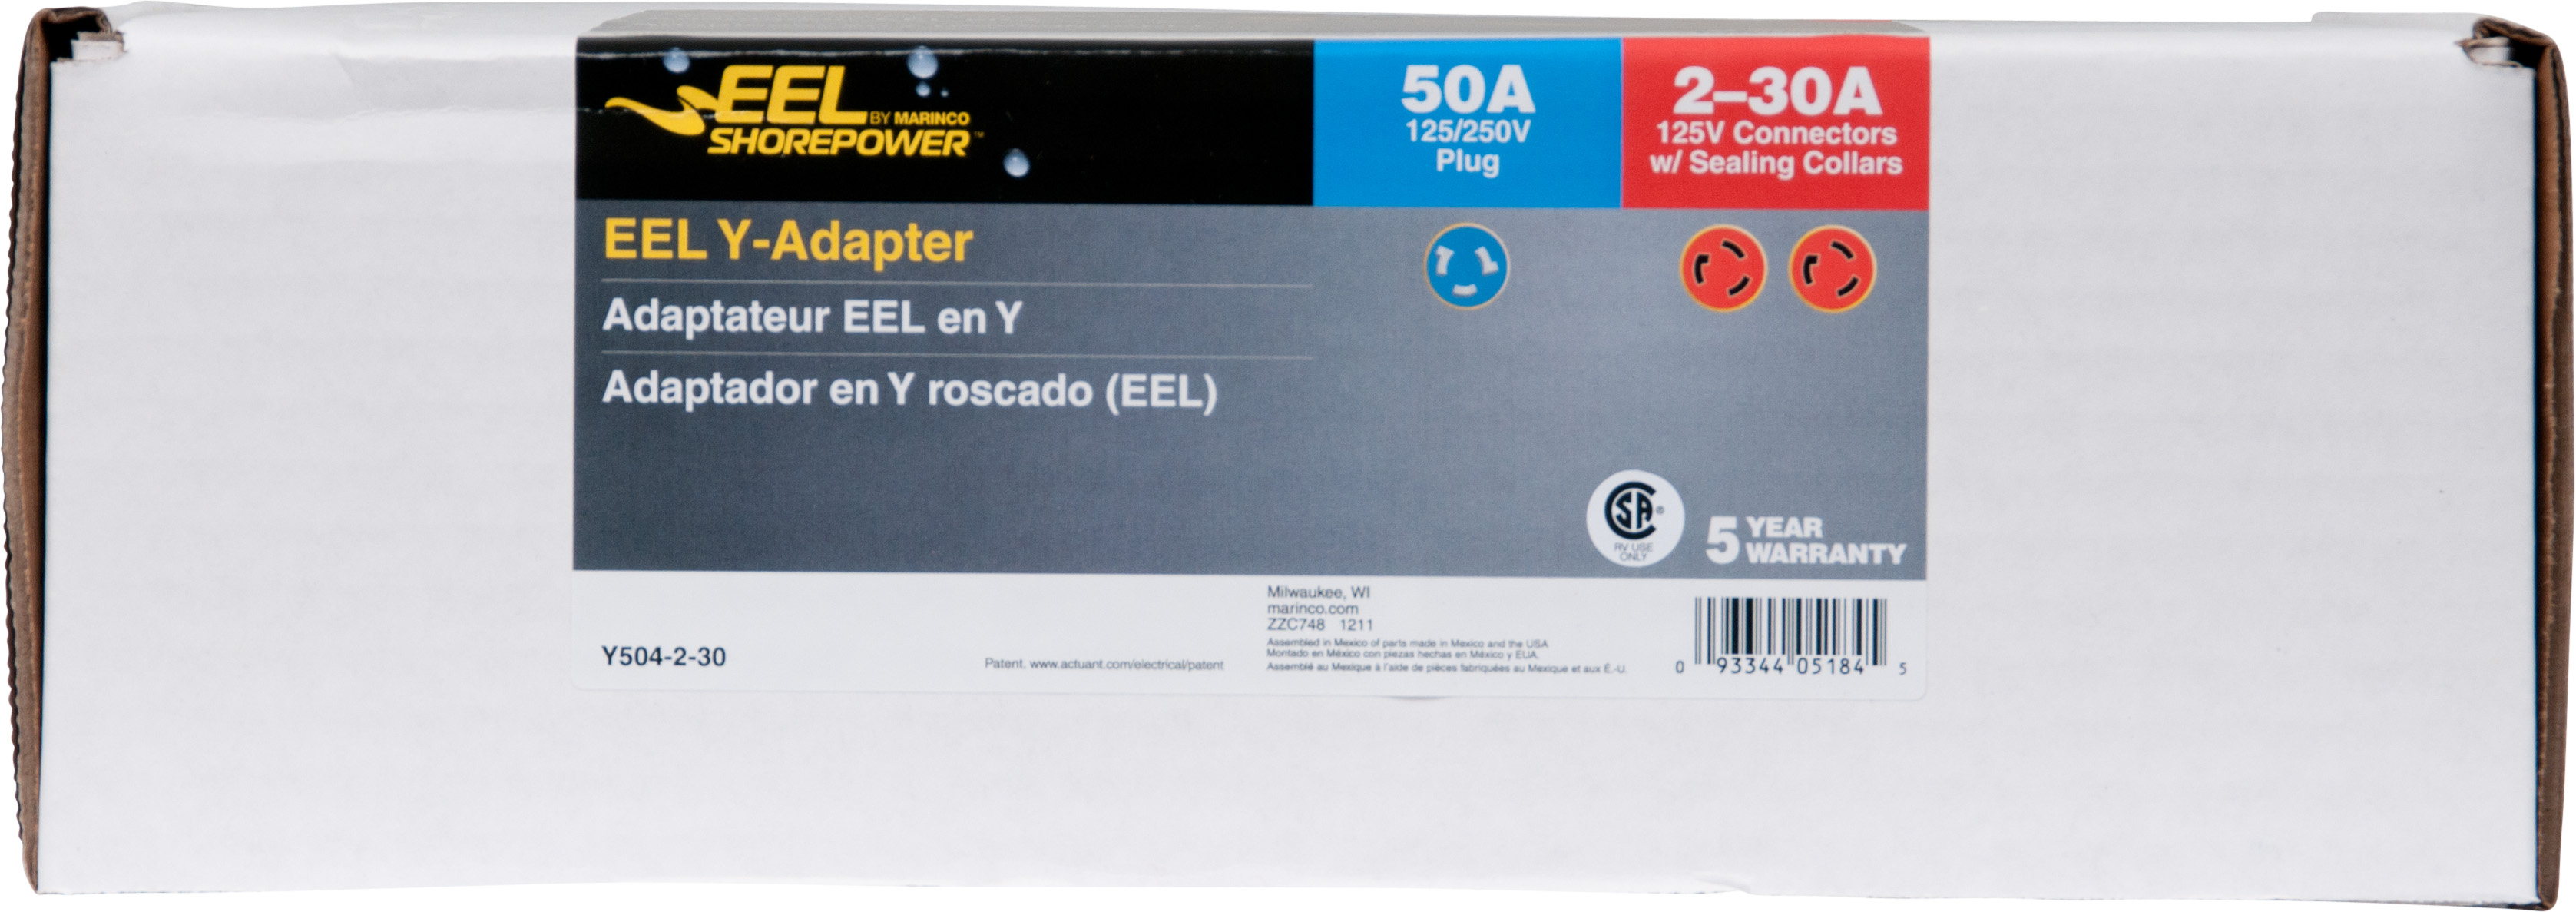 EEL Y Adapter, 50A 125/250V Male To (2) 30A 125V Females